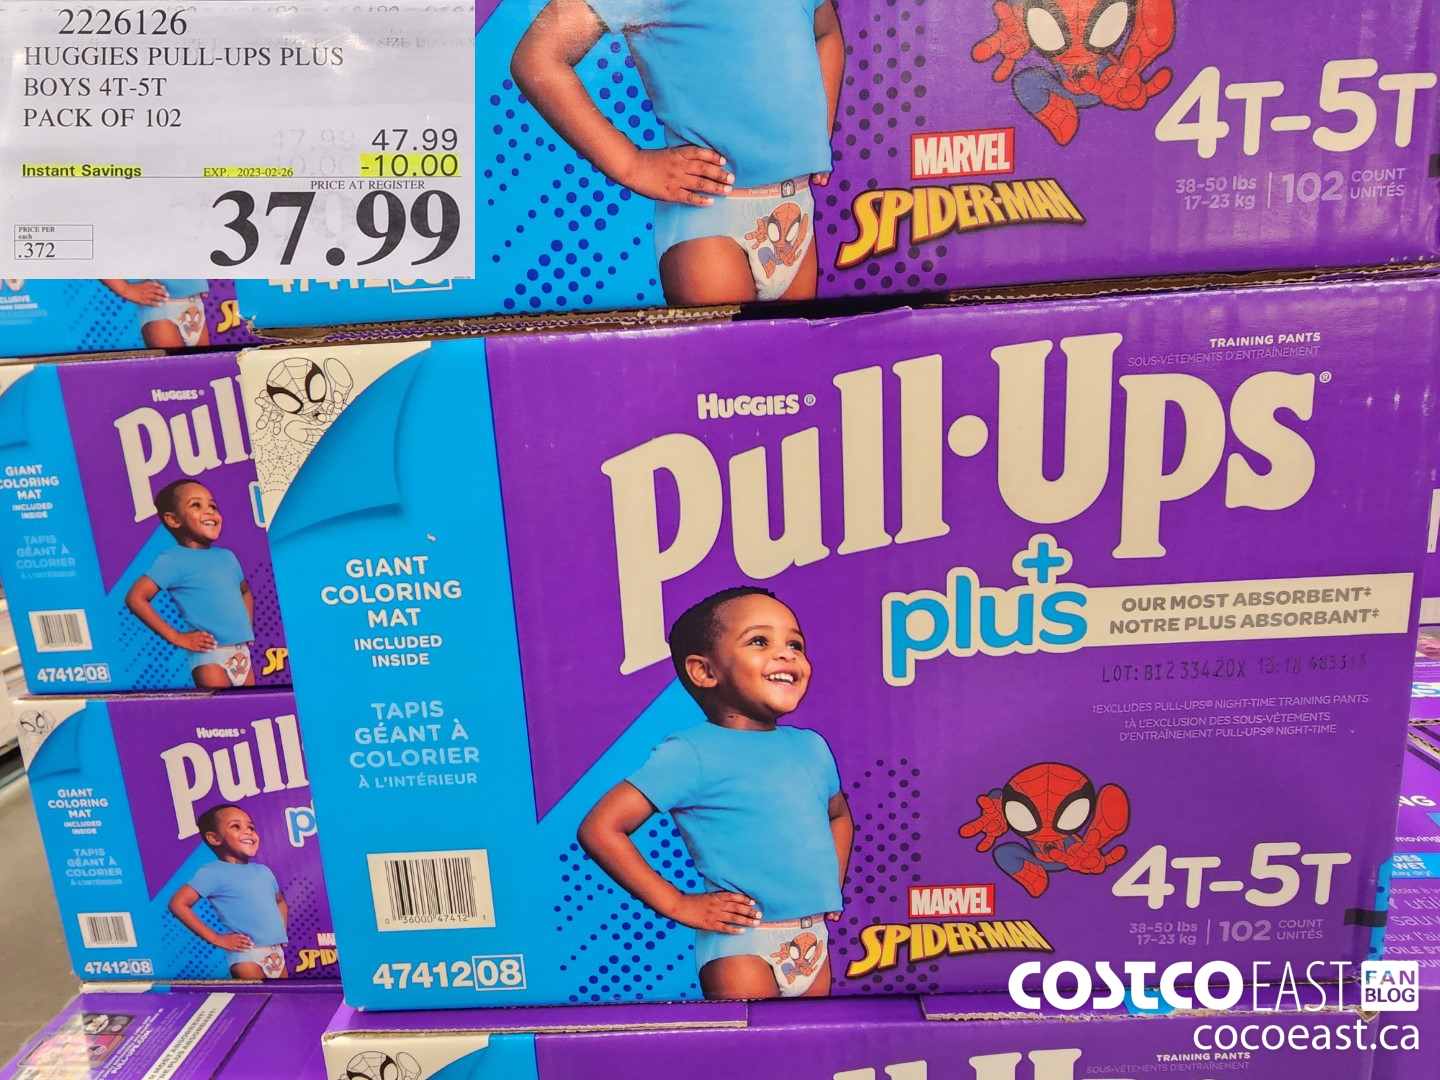 2226126 huggies pull ups plus boys 4t 5t pack of 102 9 50 instant savings  expires on 2021 09 19 36 49 - Costco East Fan Blog